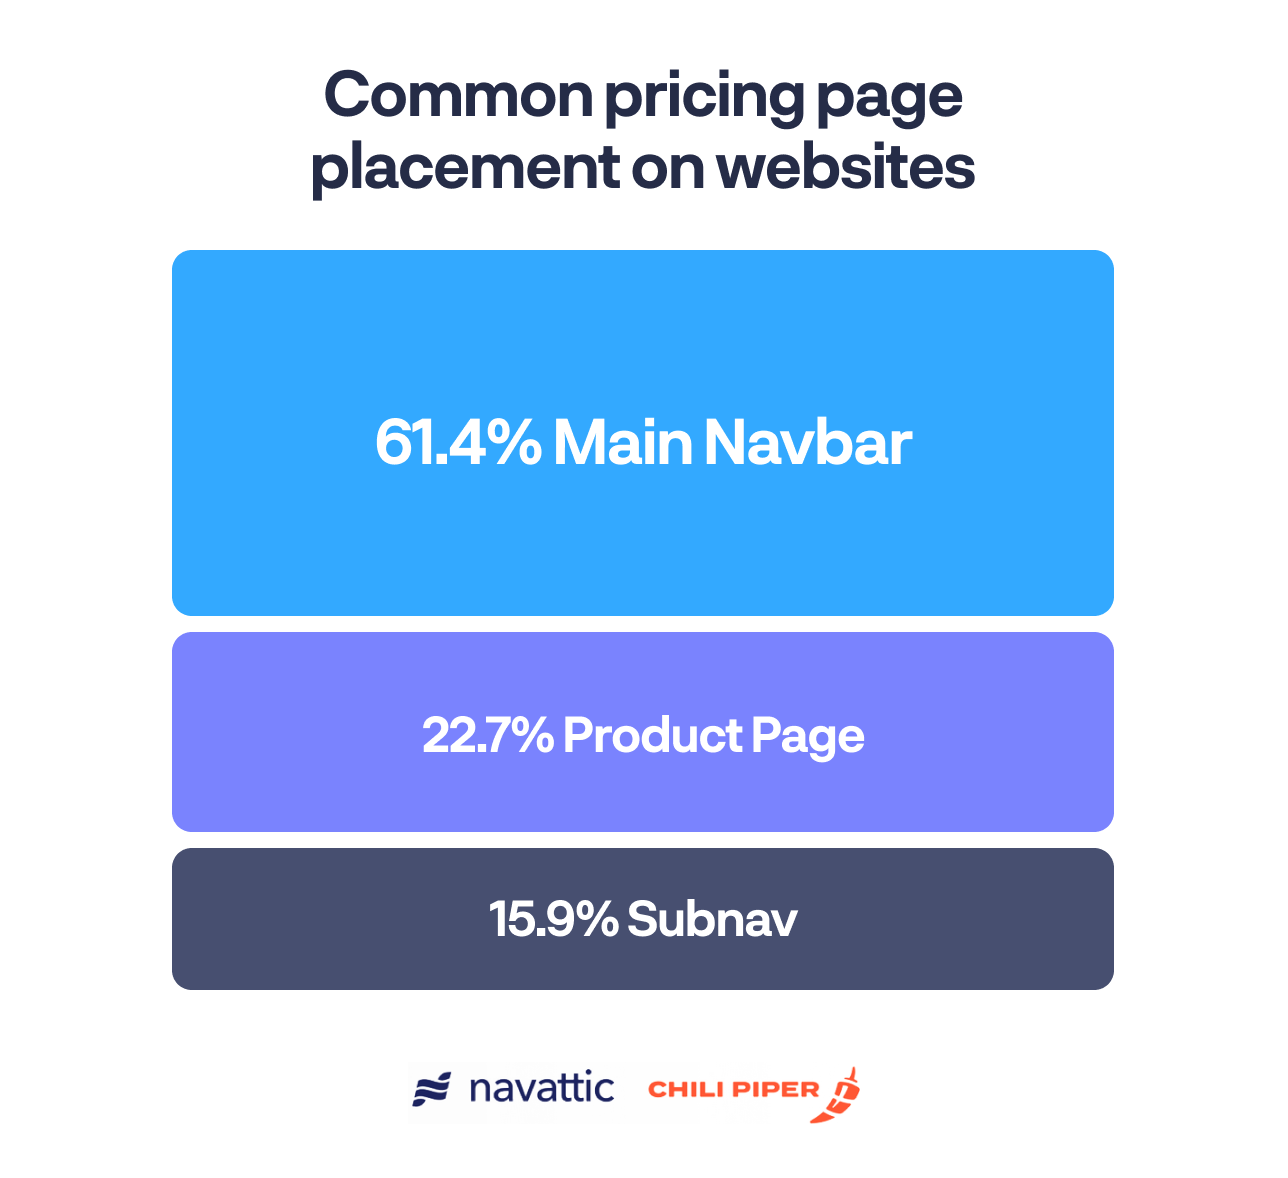 Pricing page location breakdown